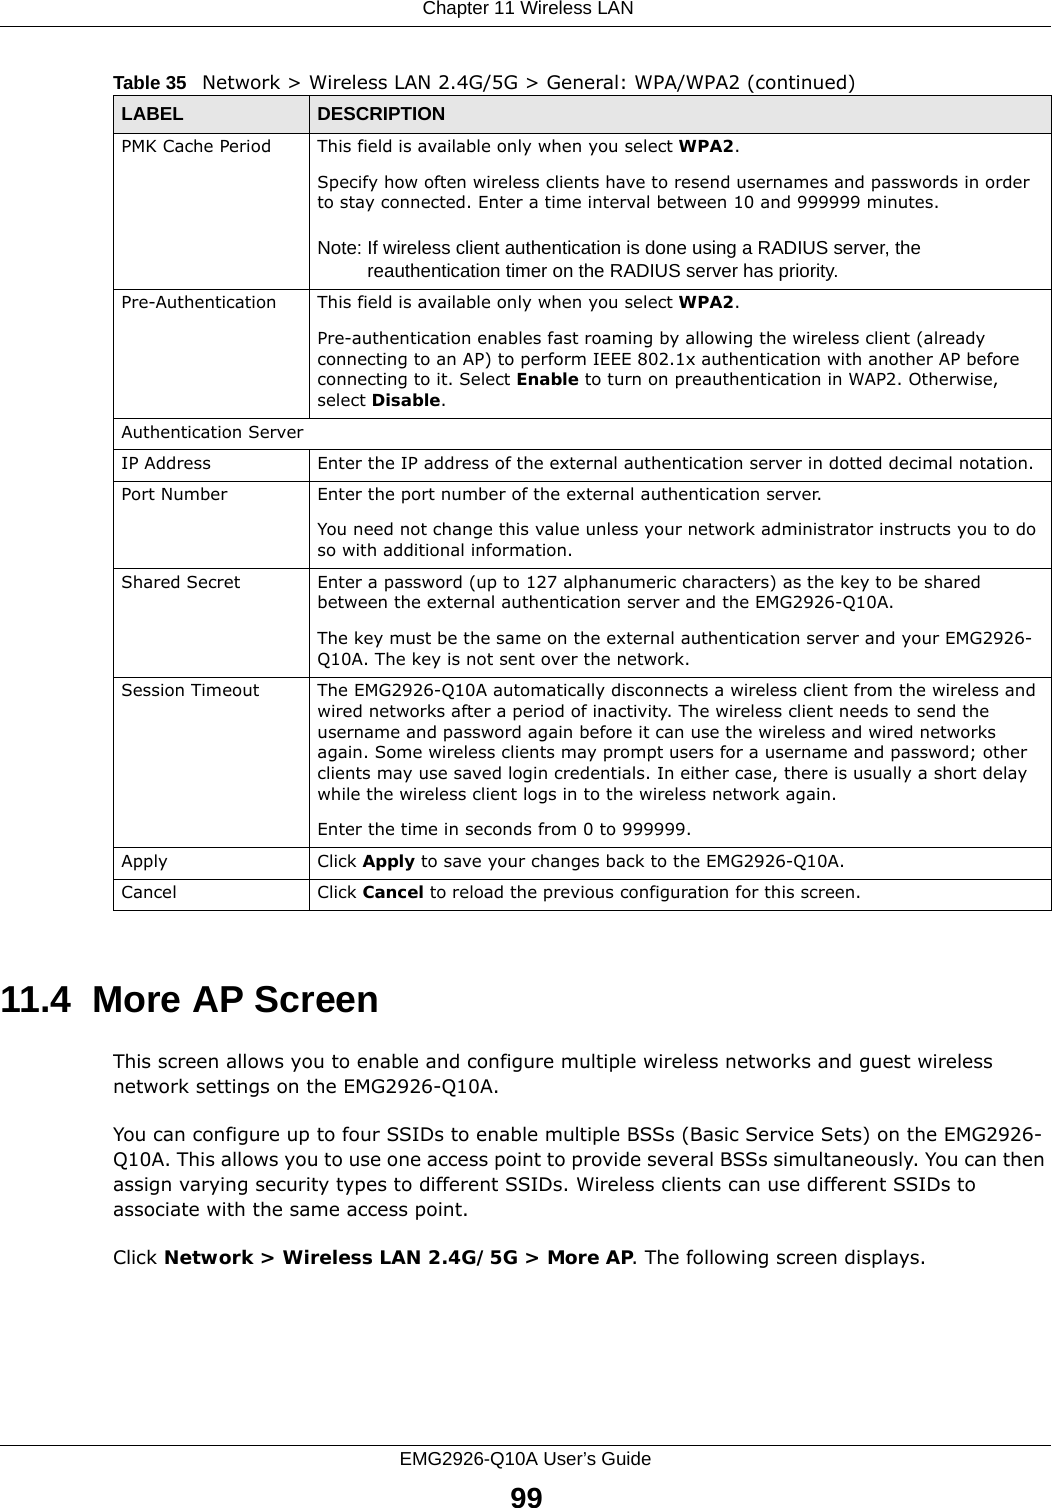  Chapter 11 Wireless LANEMG2926-Q10A User’s Guide9911.4  More AP Screen This screen allows you to enable and configure multiple wireless networks and guest wireless network settings on the EMG2926-Q10A.You can configure up to four SSIDs to enable multiple BSSs (Basic Service Sets) on the EMG2926-Q10A. This allows you to use one access point to provide several BSSs simultaneously. You can then assign varying security types to different SSIDs. Wireless clients can use different SSIDs to associate with the same access point.Click Network &gt; Wireless LAN 2.4G/5G &gt; More AP. The following screen displays.PMK Cache Period  This field is available only when you select WPA2.Specify how often wireless clients have to resend usernames and passwords in order to stay connected. Enter a time interval between 10 and 999999 minutes. Note: If wireless client authentication is done using a RADIUS server, the reauthentication timer on the RADIUS server has priority.Pre-Authentication  This field is available only when you select WPA2.Pre-authentication enables fast roaming by allowing the wireless client (already connecting to an AP) to perform IEEE 802.1x authentication with another AP before connecting to it. Select Enable to turn on preauthentication in WAP2. Otherwise, select Disable.Authentication ServerIP Address Enter the IP address of the external authentication server in dotted decimal notation.Port Number Enter the port number of the external authentication server.  You need not change this value unless your network administrator instructs you to do so with additional information. Shared Secret Enter a password (up to 127 alphanumeric characters) as the key to be shared between the external authentication server and the EMG2926-Q10A.The key must be the same on the external authentication server and your EMG2926-Q10A. The key is not sent over the network. Session Timeout The EMG2926-Q10A automatically disconnects a wireless client from the wireless and wired networks after a period of inactivity. The wireless client needs to send the username and password again before it can use the wireless and wired networks again. Some wireless clients may prompt users for a username and password; other clients may use saved login credentials. In either case, there is usually a short delay while the wireless client logs in to the wireless network again.Enter the time in seconds from 0 to 999999.Apply Click Apply to save your changes back to the EMG2926-Q10A.Cancel Click Cancel to reload the previous configuration for this screen.Table 35   Network &gt; Wireless LAN 2.4G/5G &gt; General: WPA/WPA2 (continued)LABEL DESCRIPTION